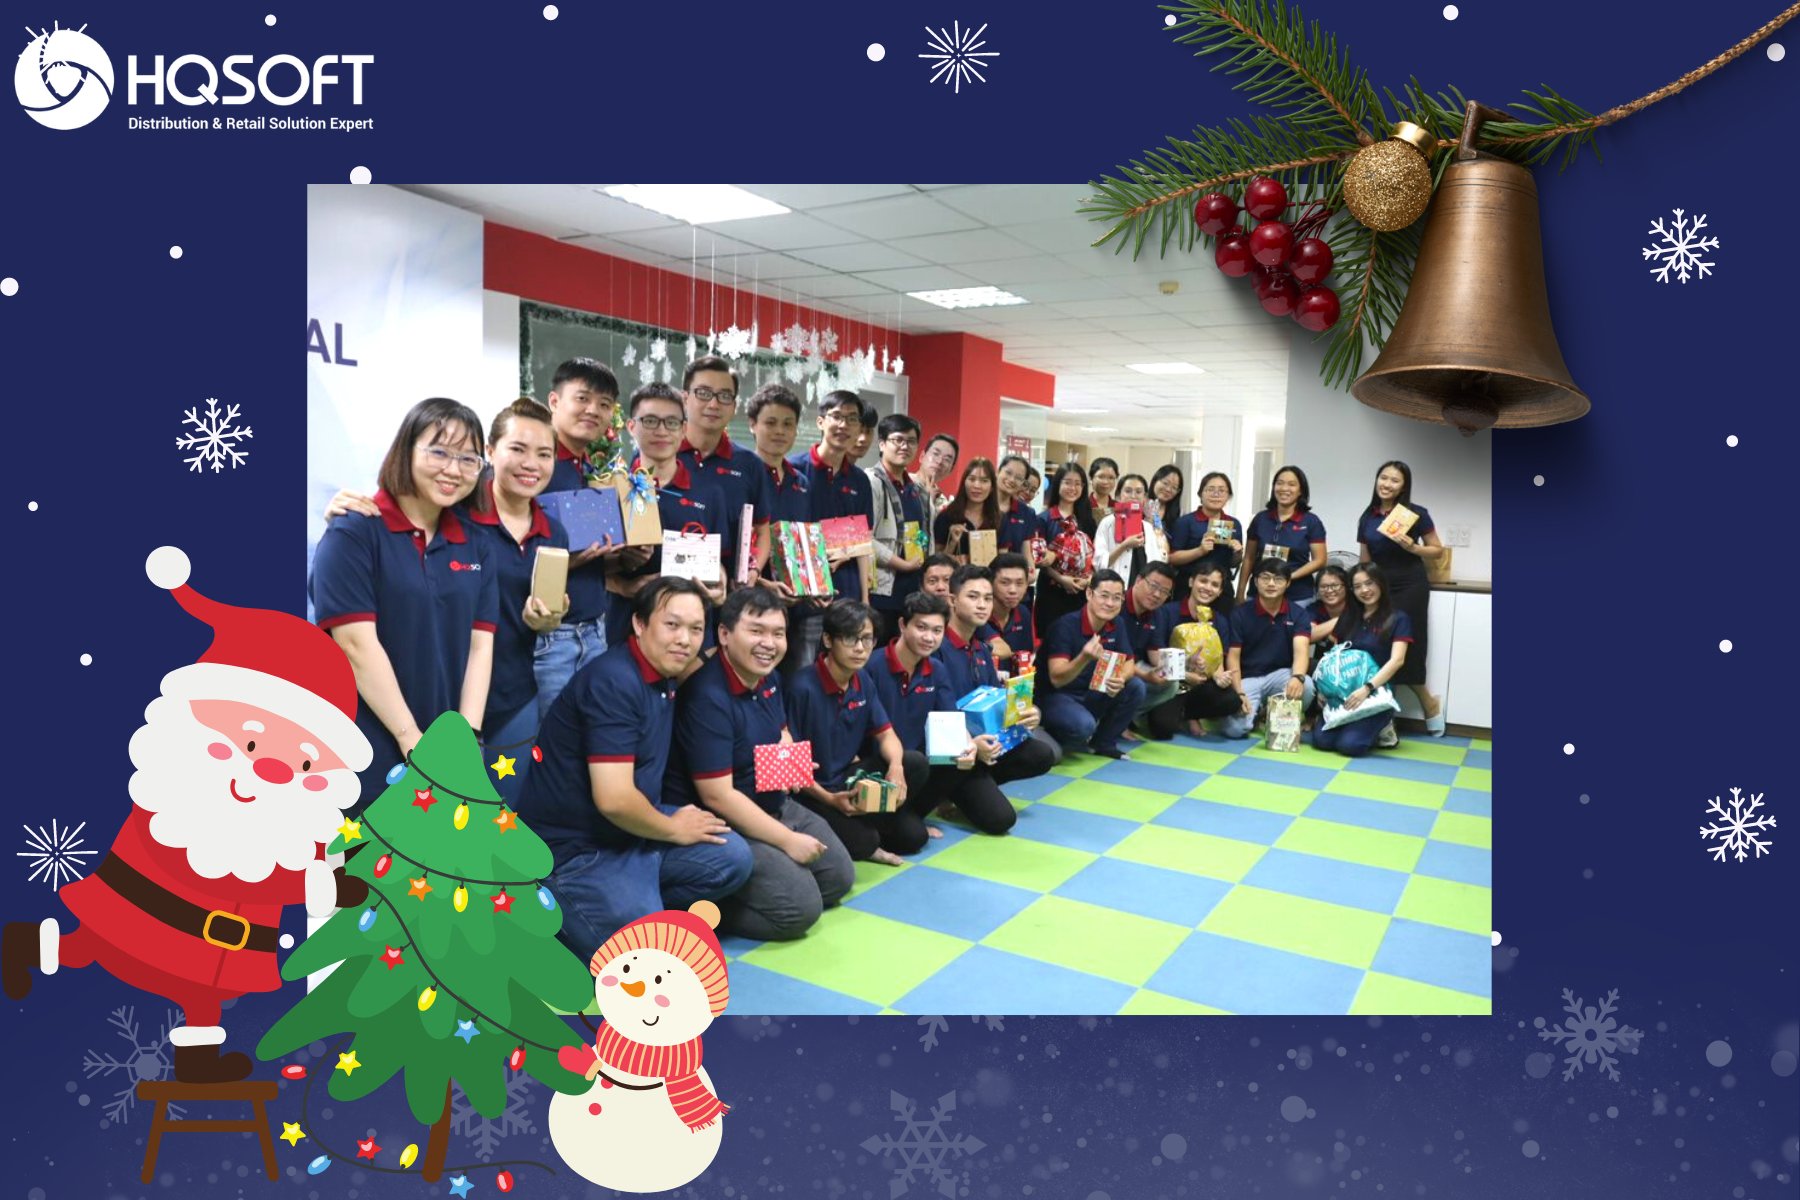 MERRY CHRISTMAS WITH HQSOFT FAMILY - HQsoft